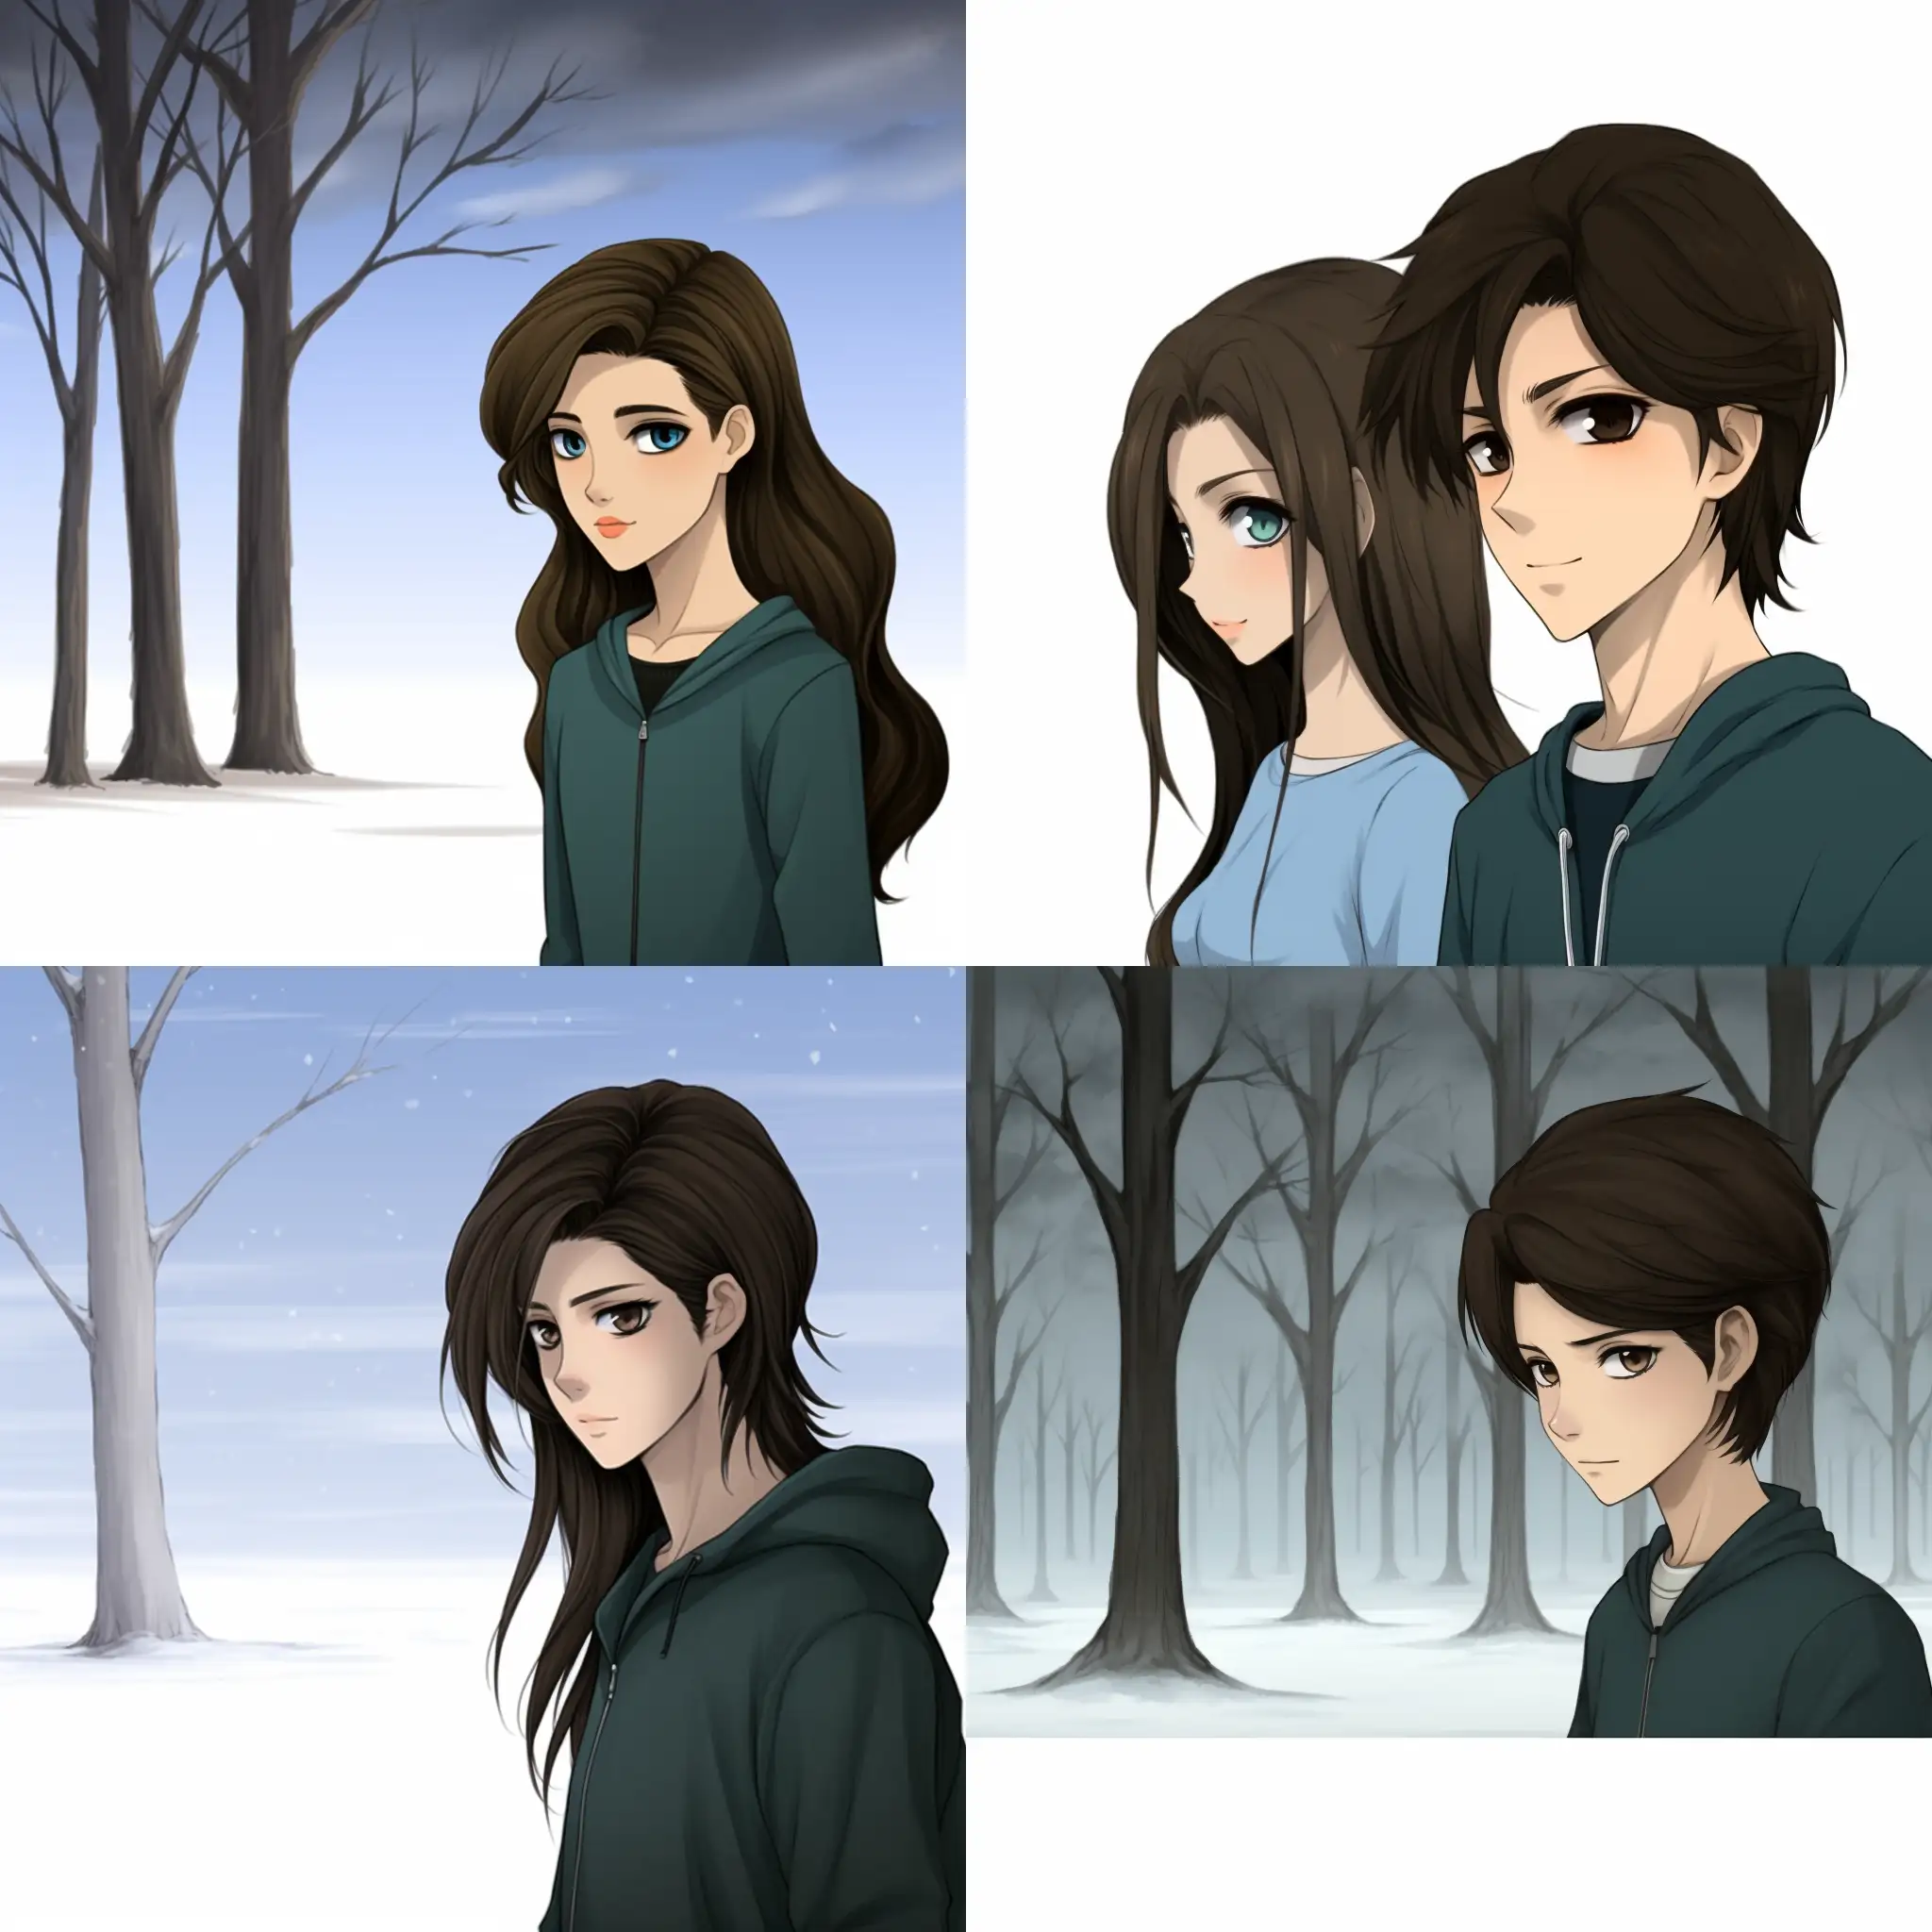 Adorable-Teenage-Couple-Cartoon-Art-with-Striking-Features